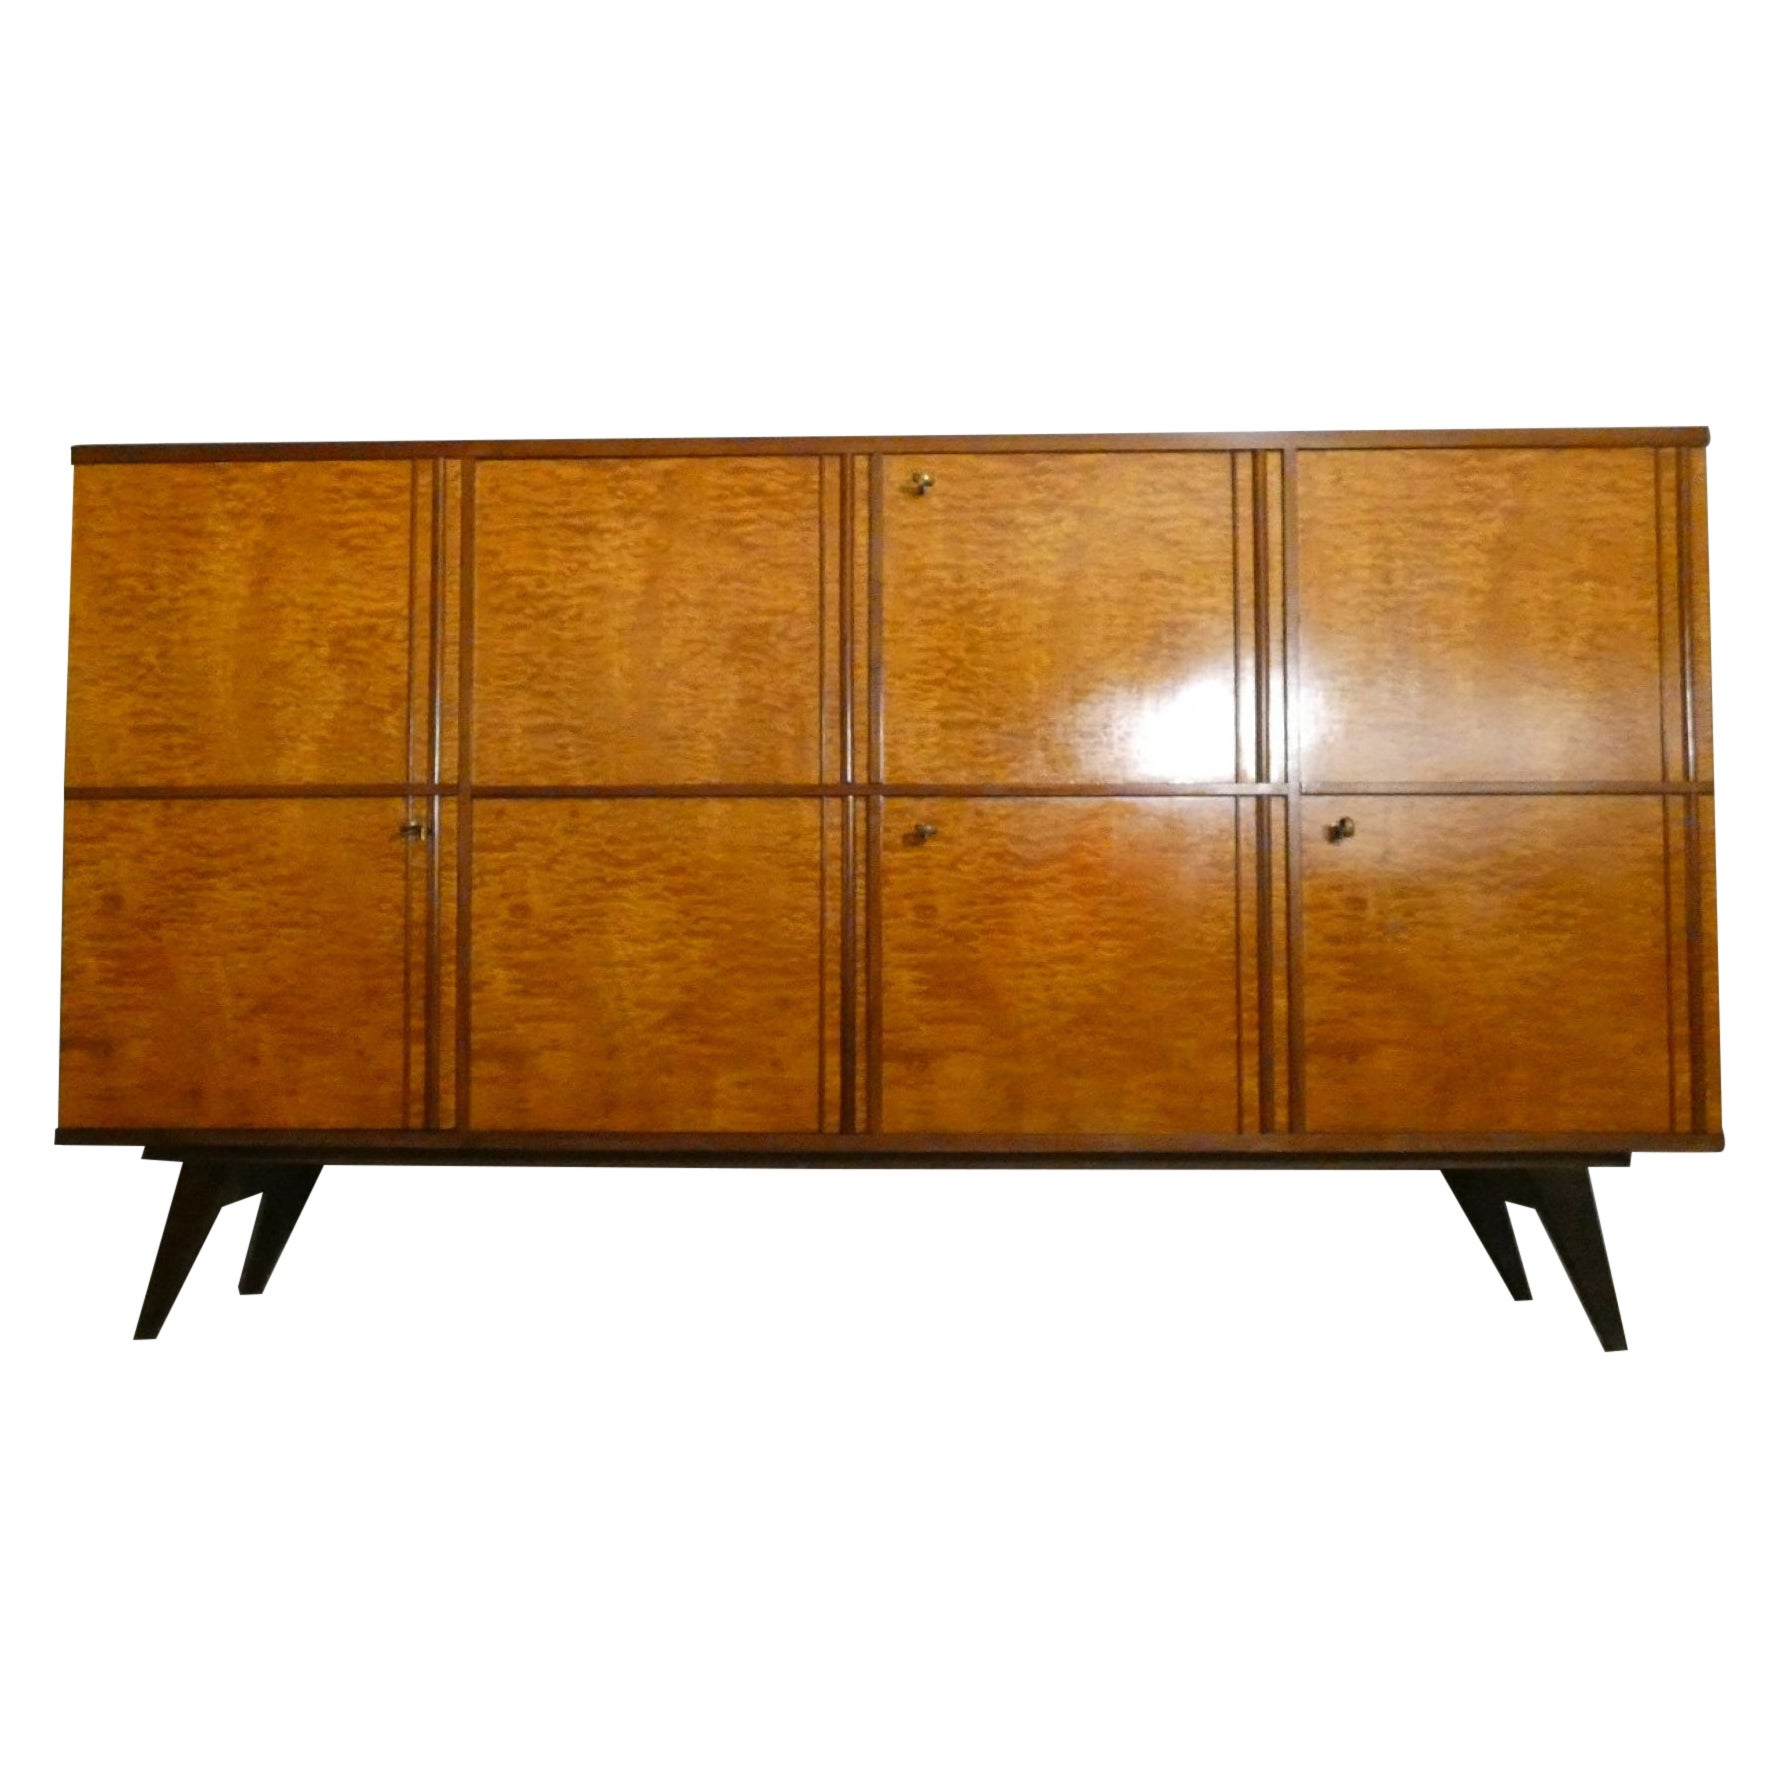 Teak sideboard with drawers, Italy 1970s For Sale